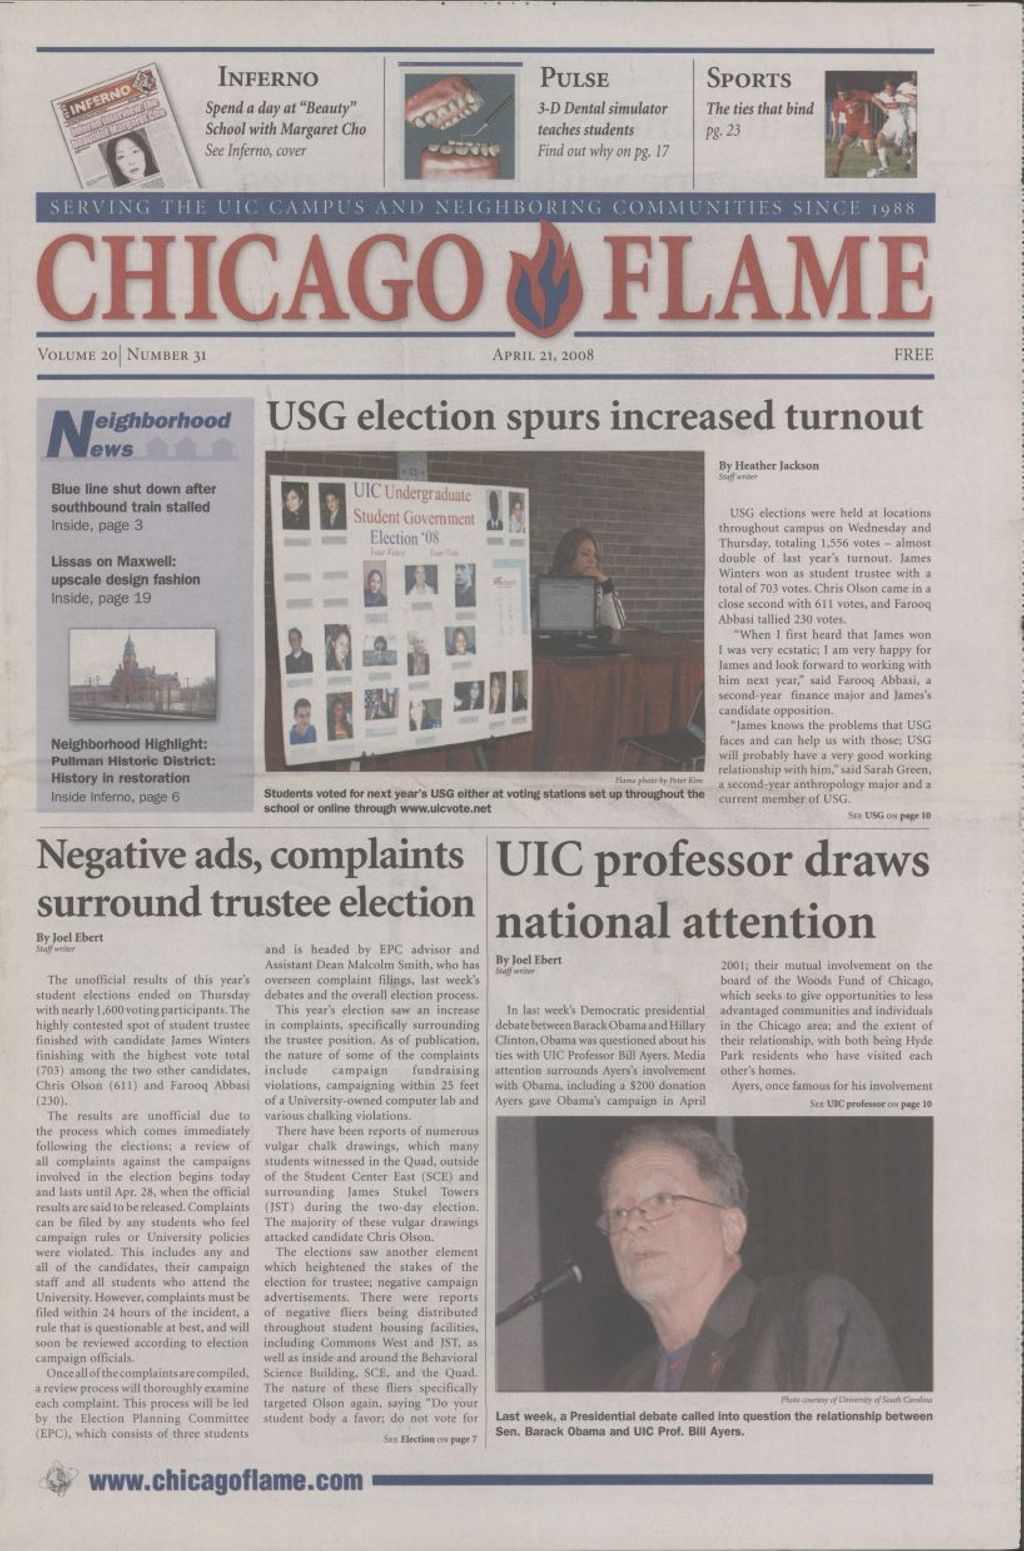 Chicago Flame (April 21, 2008)